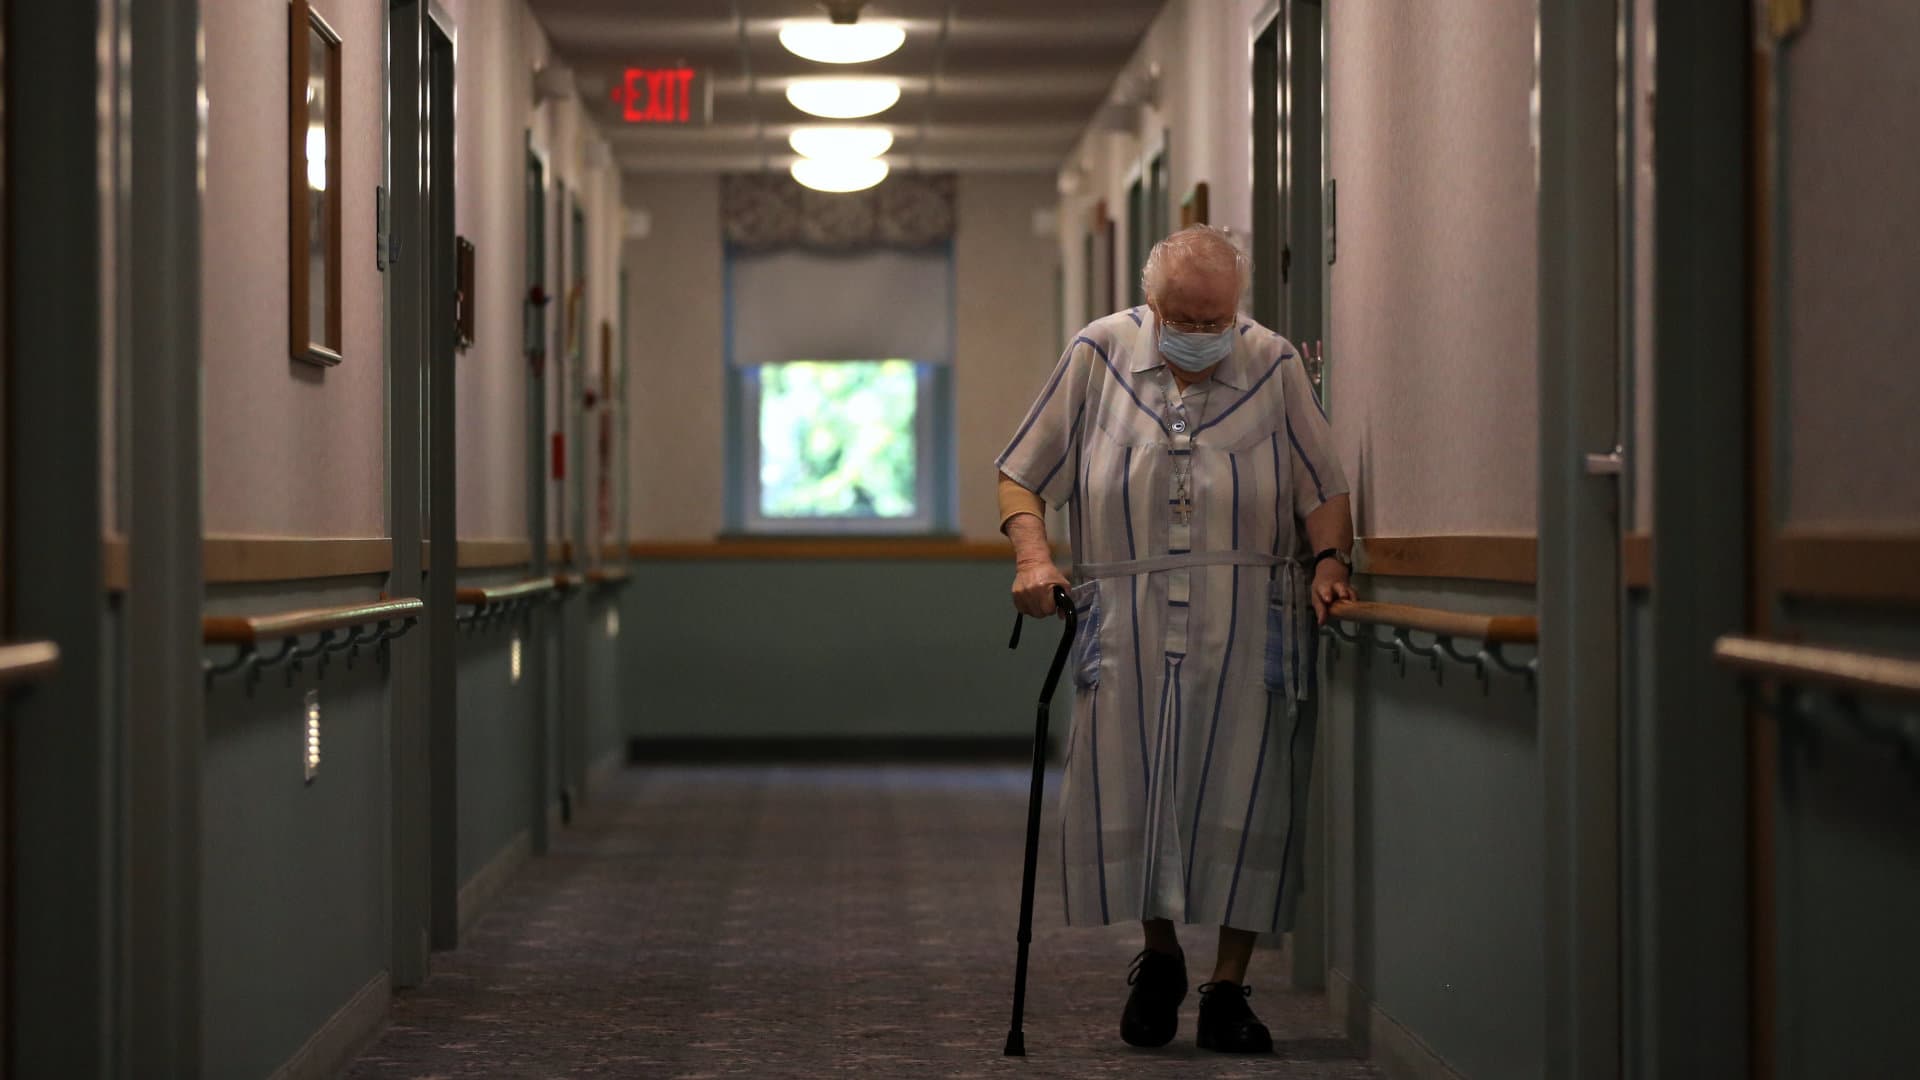 Louisa Perreault, who had a month long battle with Covid-19 during an outbreak in April, passes down the hall at St. Chretienne Retirement Residence in Marlborough, MA.